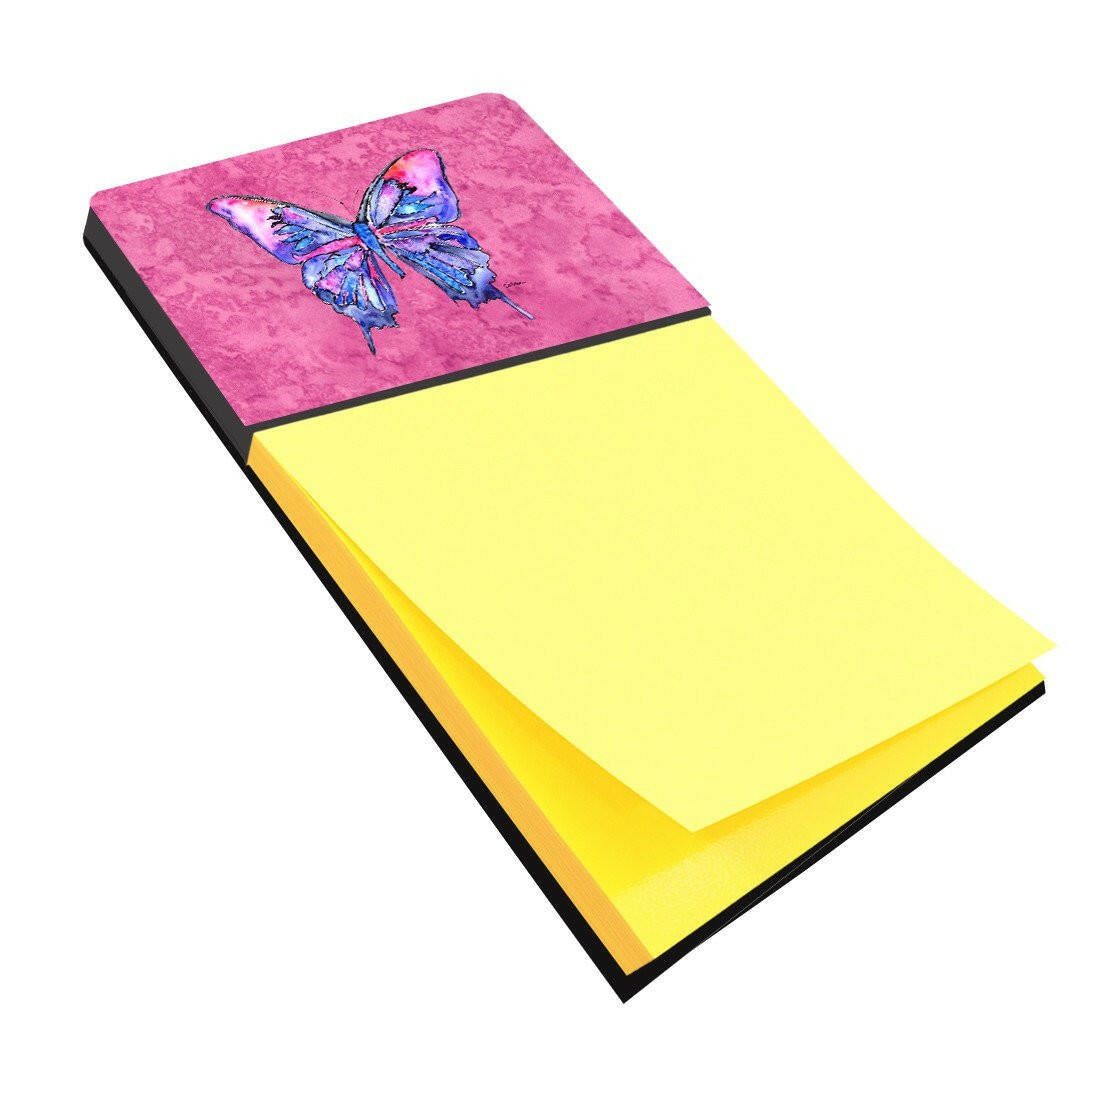 Butterfly on Pink Refiillable Sticky Note Holder or Postit Note Dispenser 8859SN by Caroline's Treasures